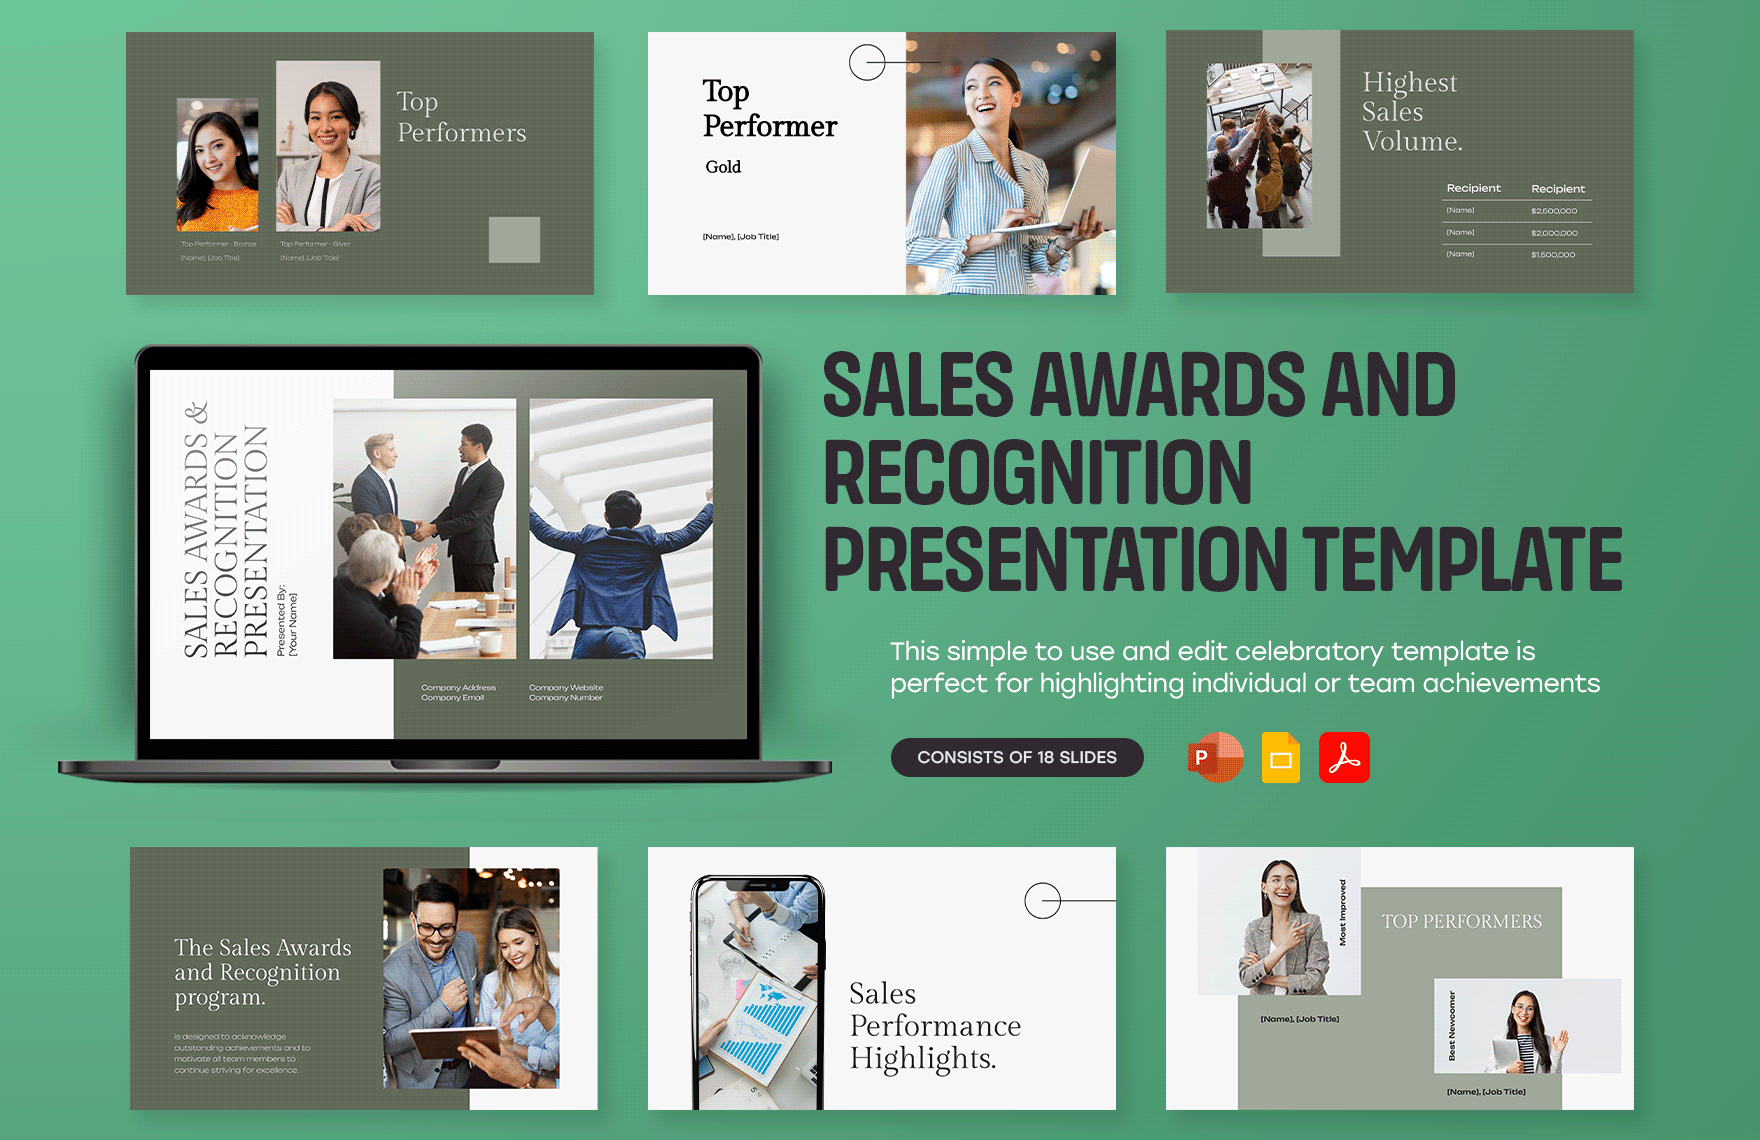 Sales Awards and Recognition Presentation Template